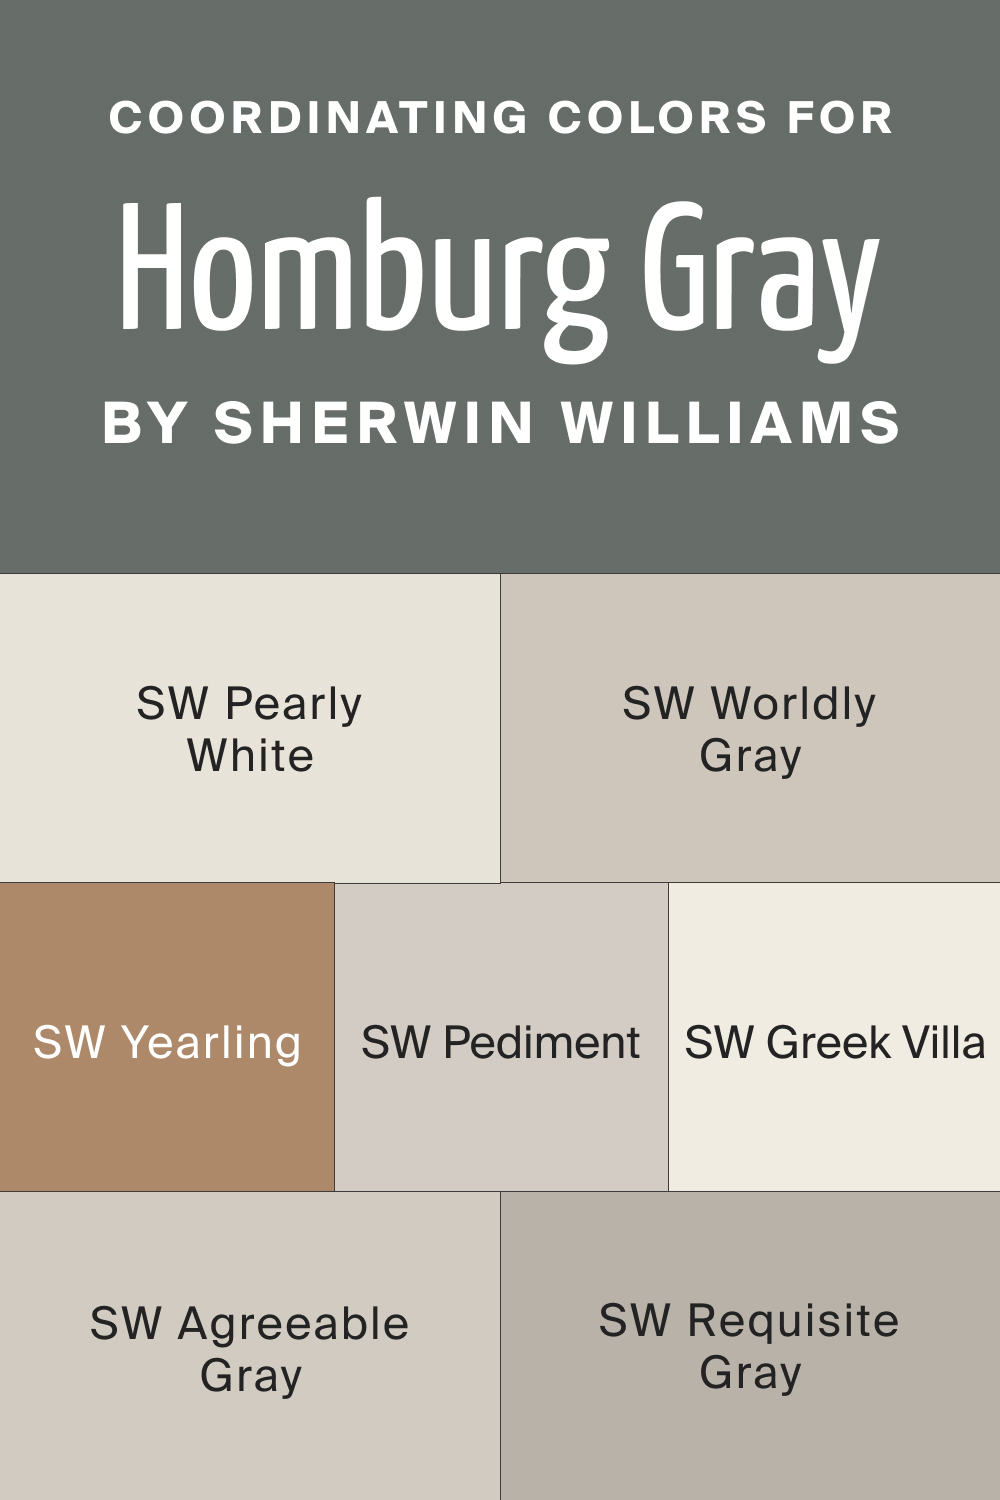 Coordinating Colors for SW 7622 Homburg Gray by Sherwin Williams